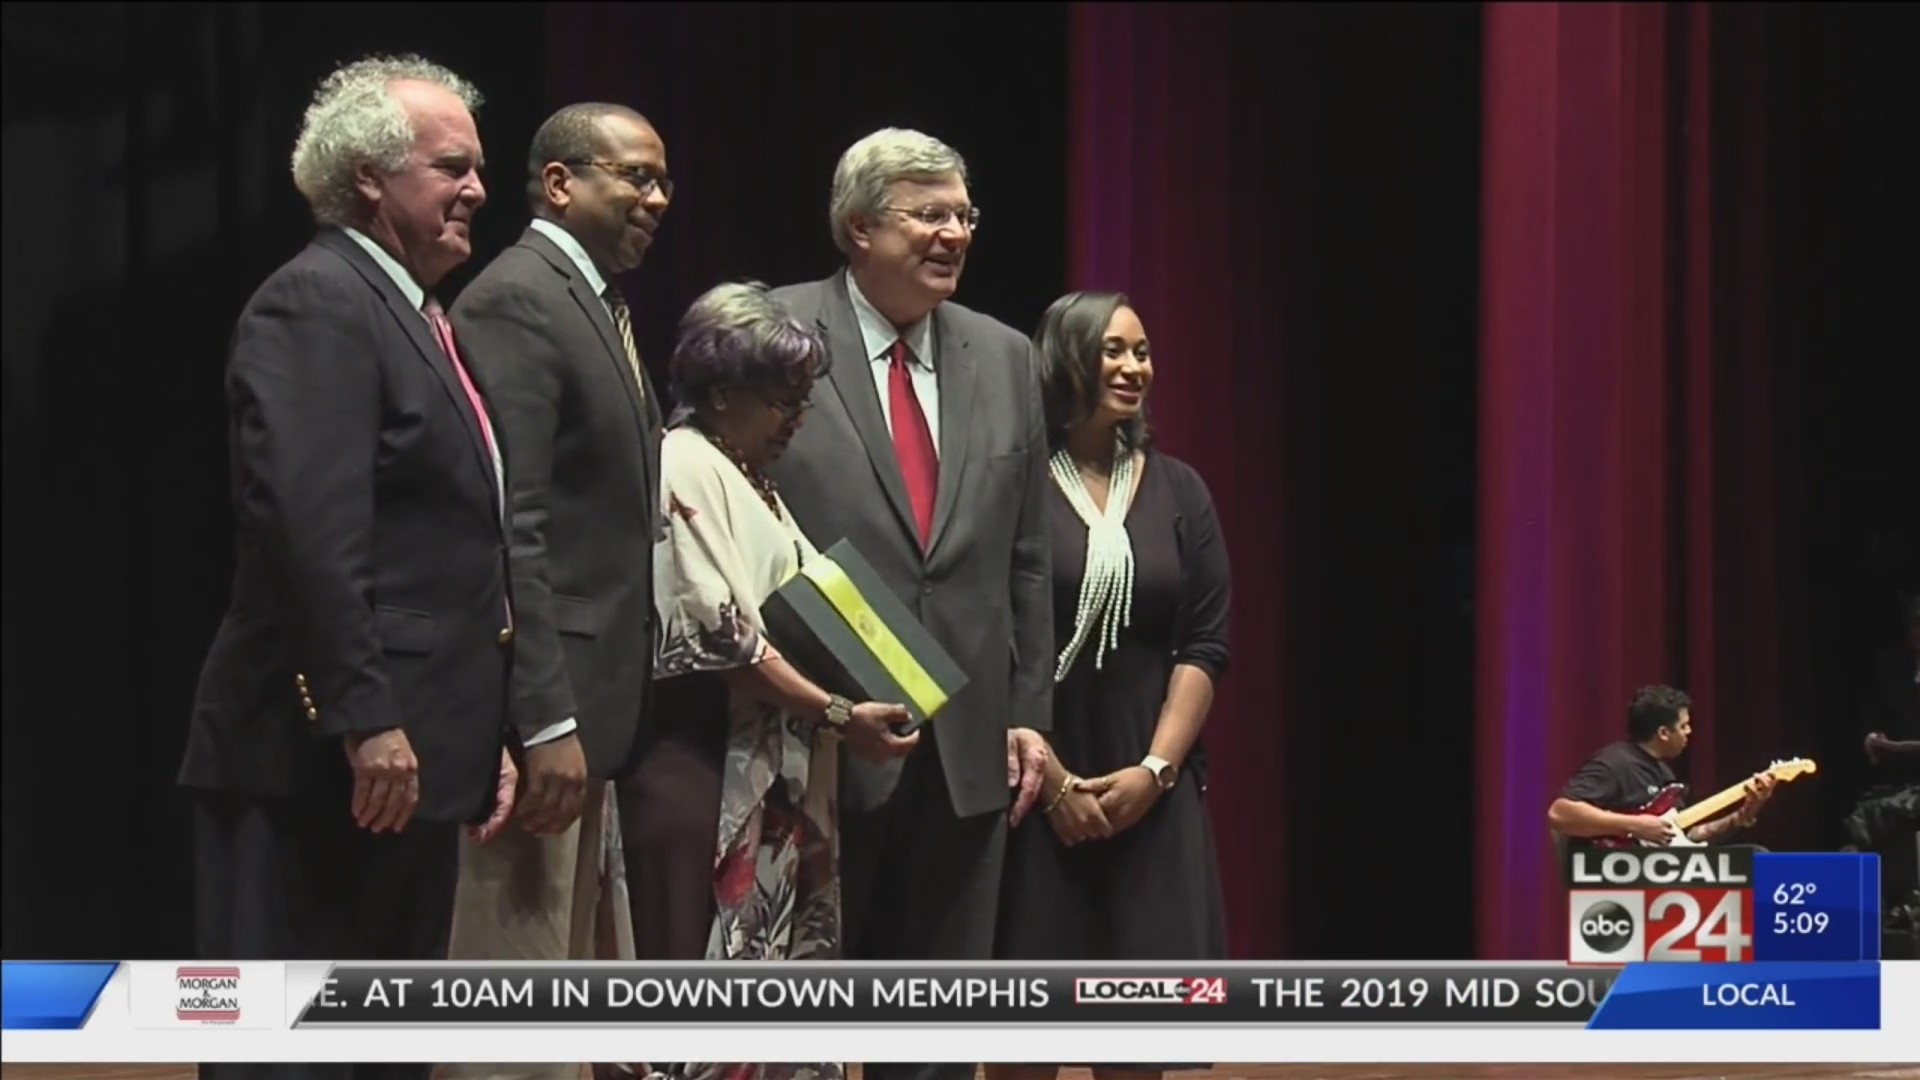 Ovation Awards honor Memphis city employees for their hard work